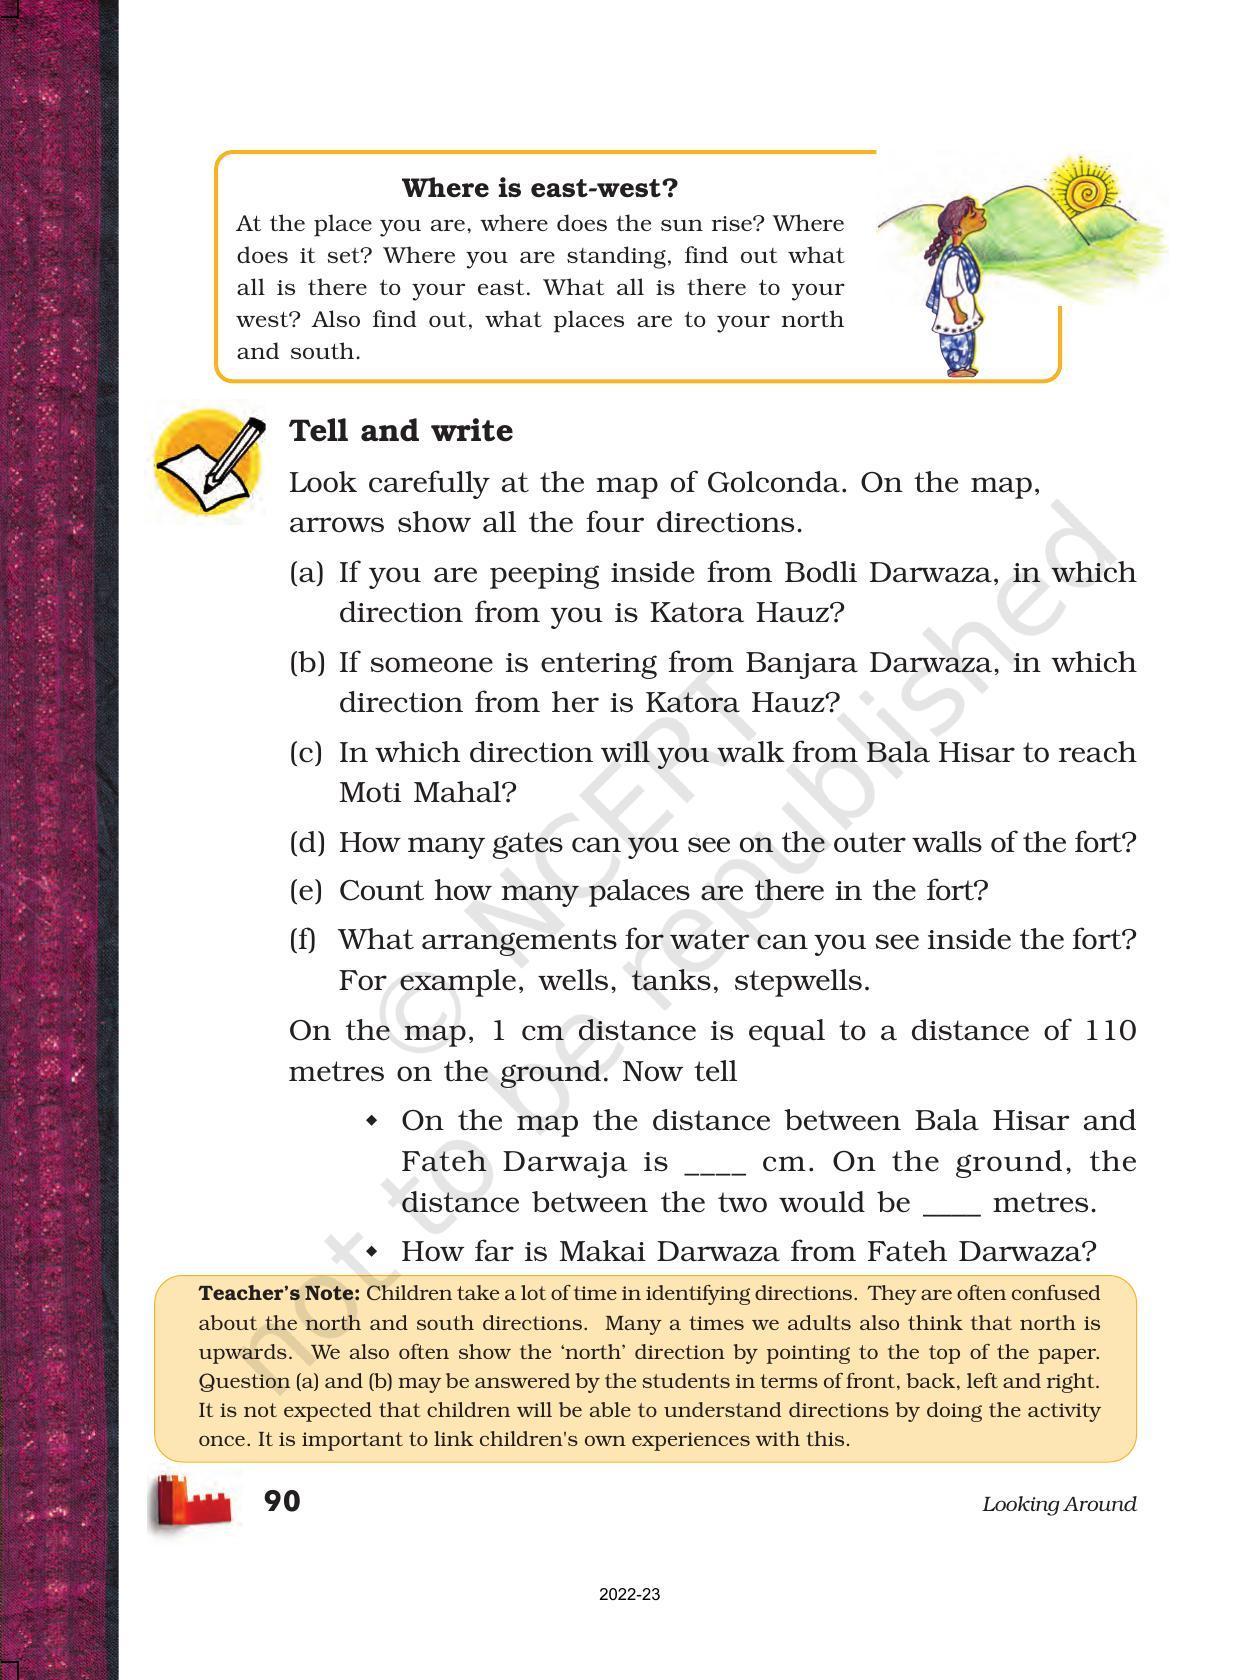 NCERT Book for Class 5 EVS Chapter 10 Walls Tell Stories - Page 4